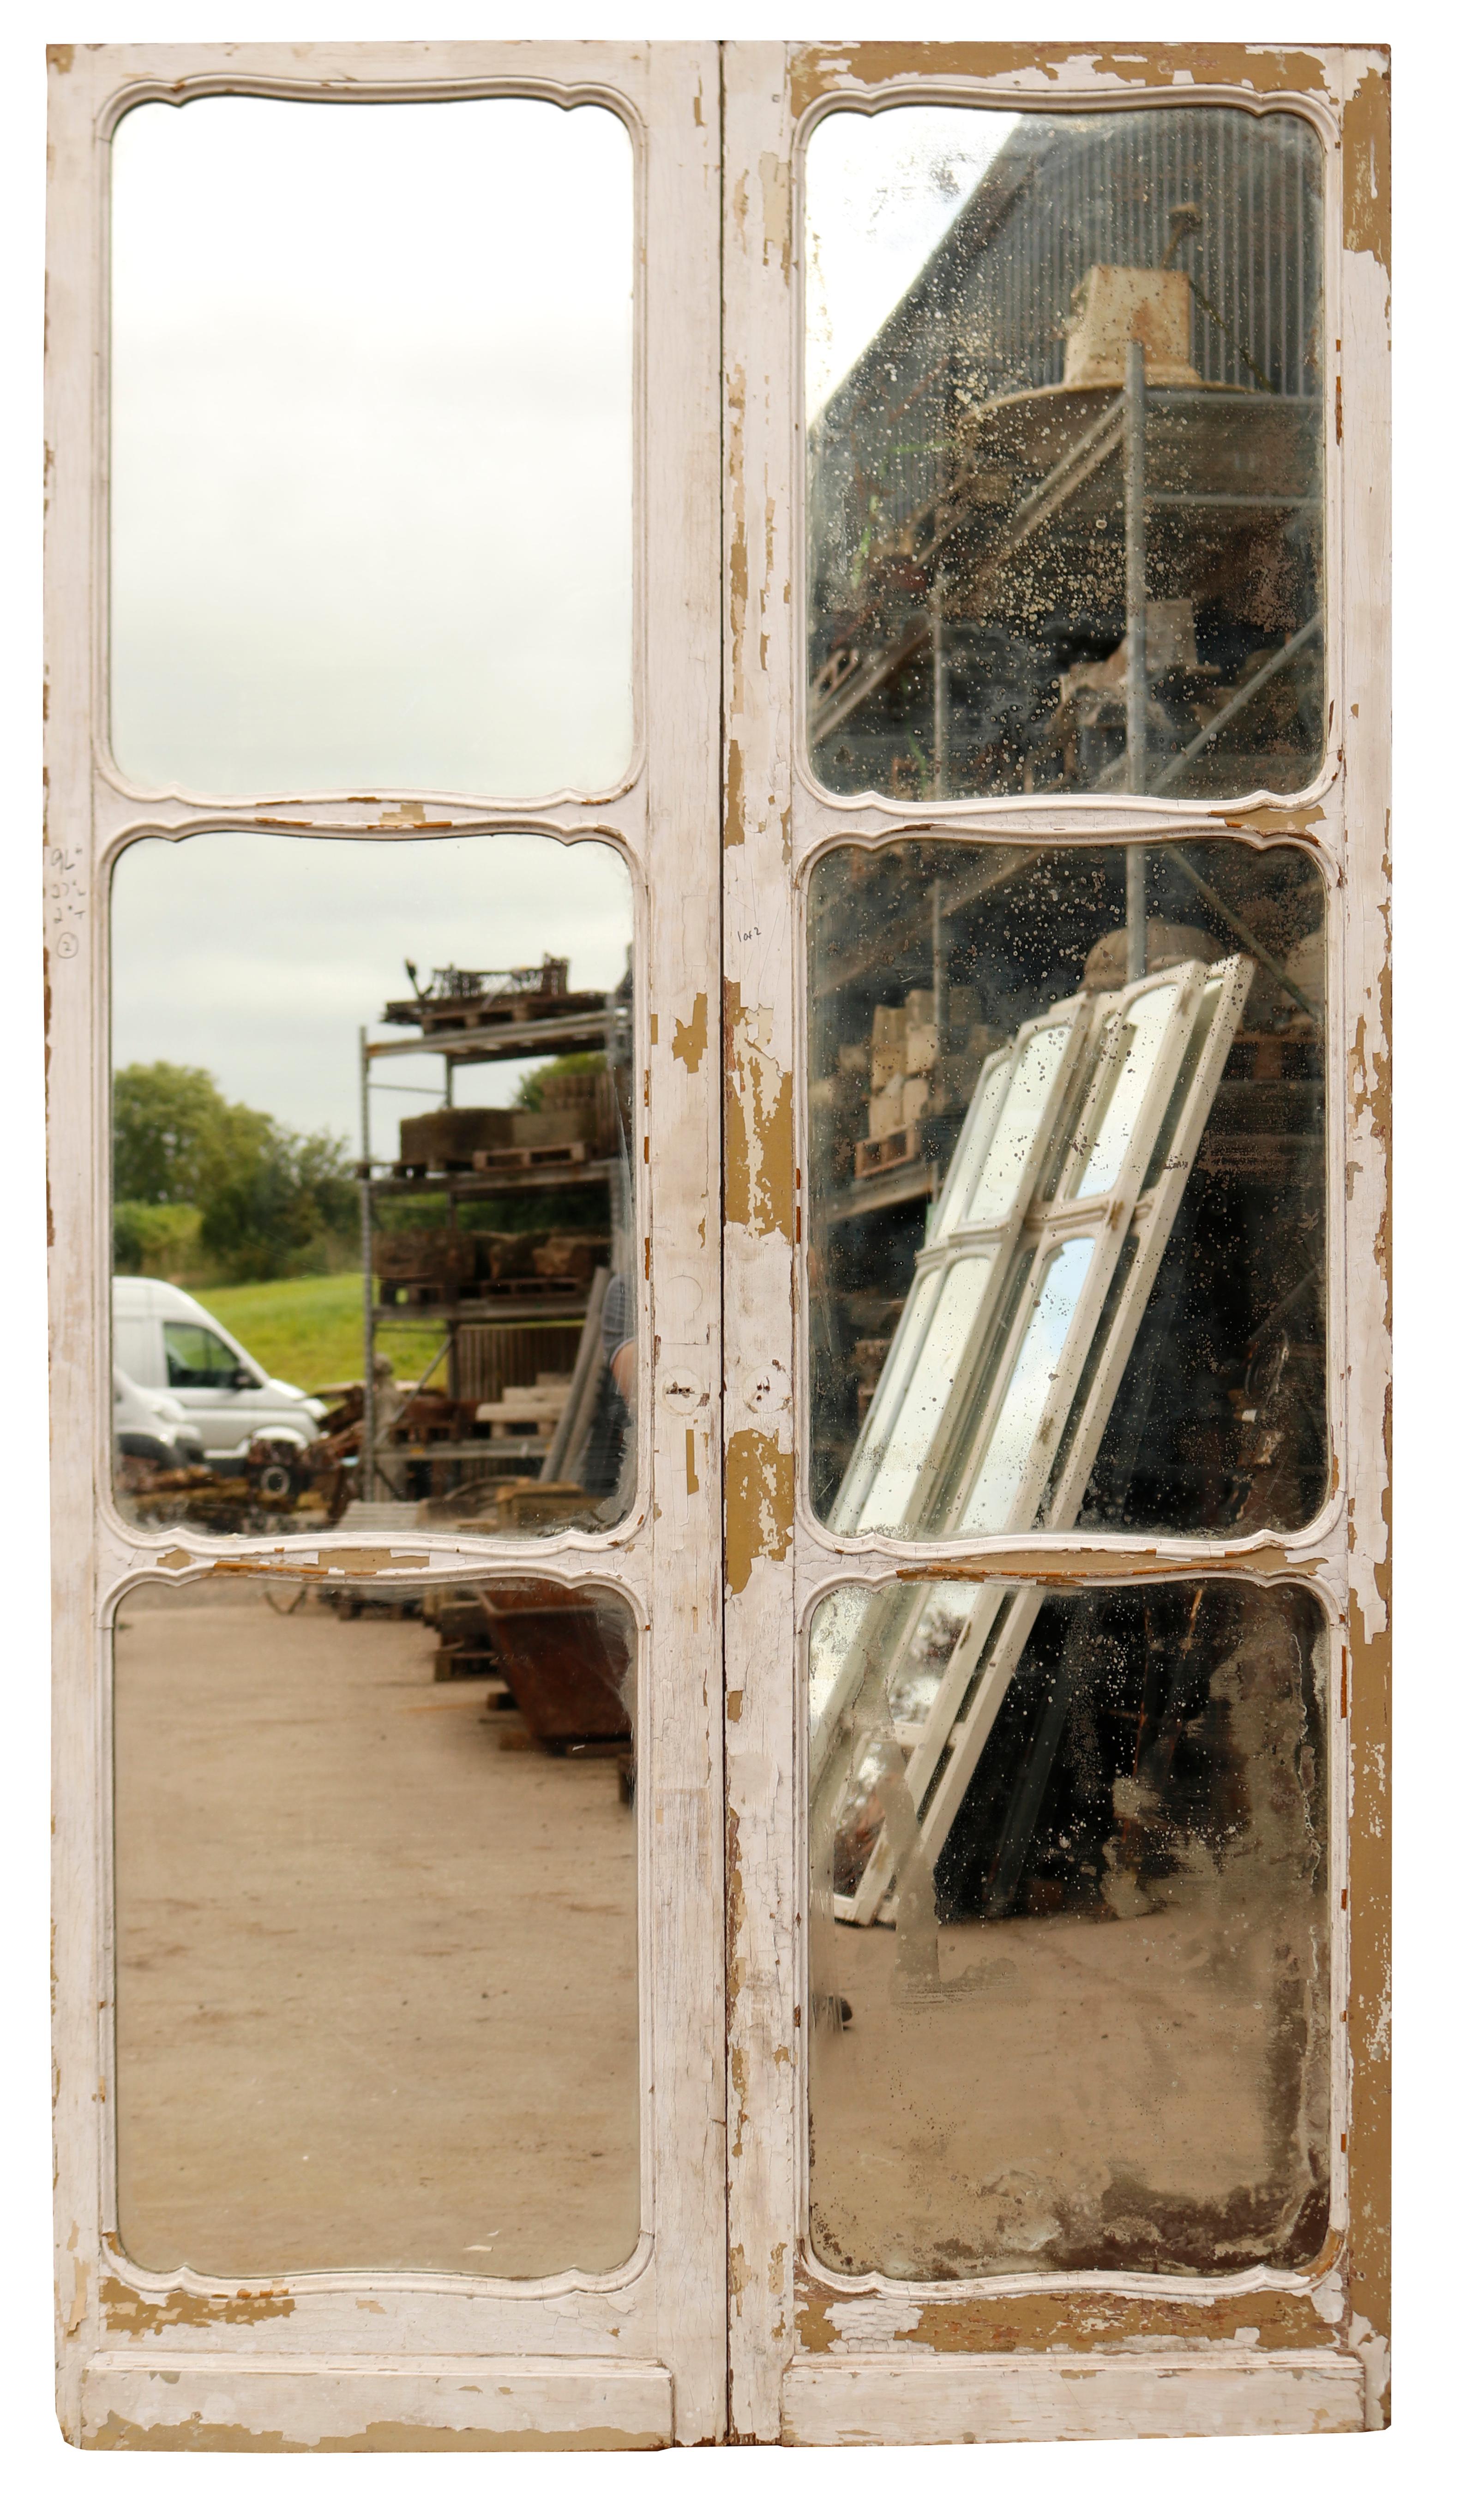 Set of Mirrored Oak double doors. Original mercury mirrored glass and oak frames, with a delightful crusty paint finish.